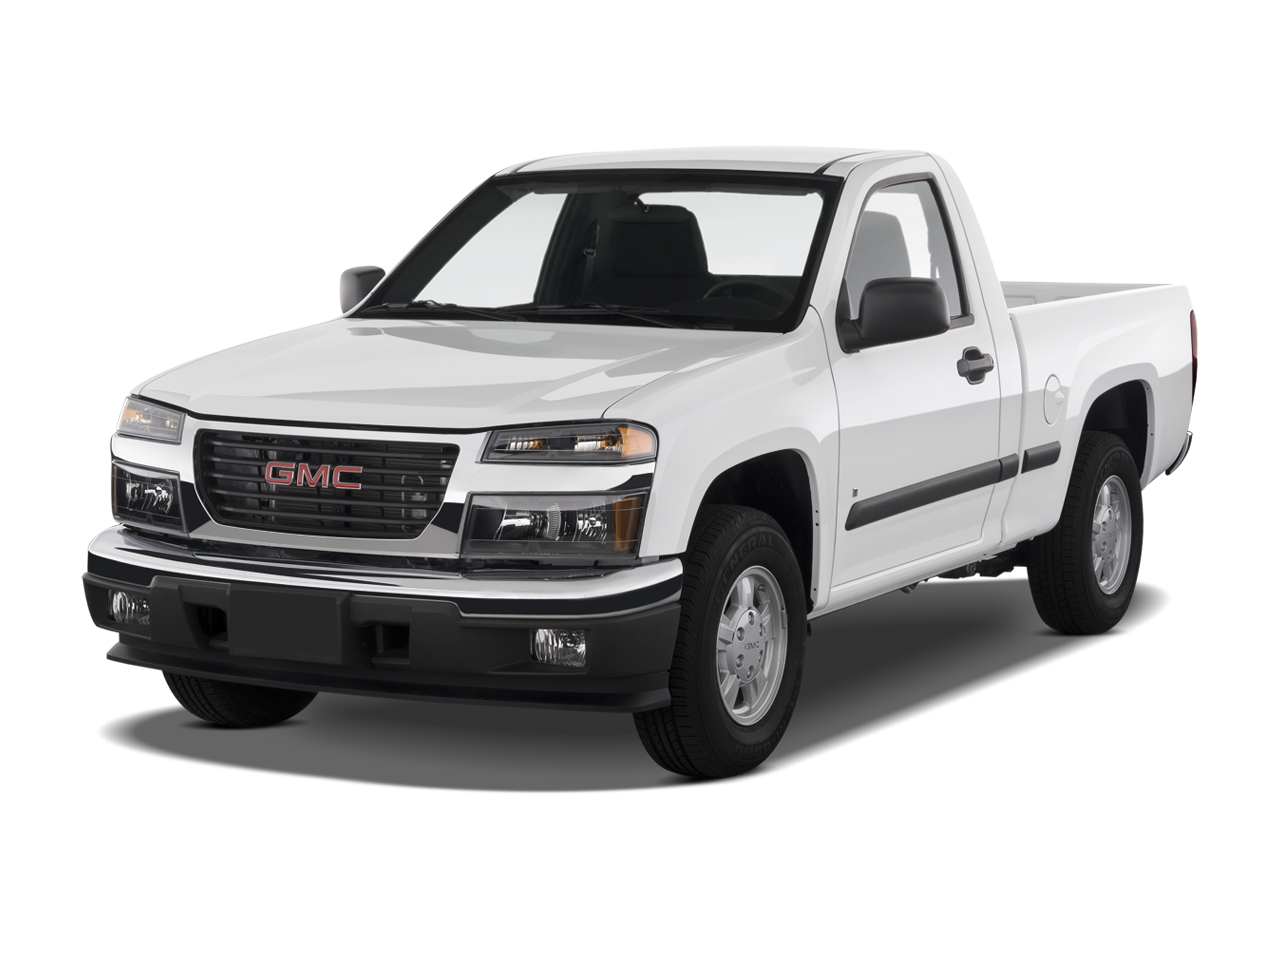 2011 GMC Canyon Prices, Reviews, and Photos - MotorTrend